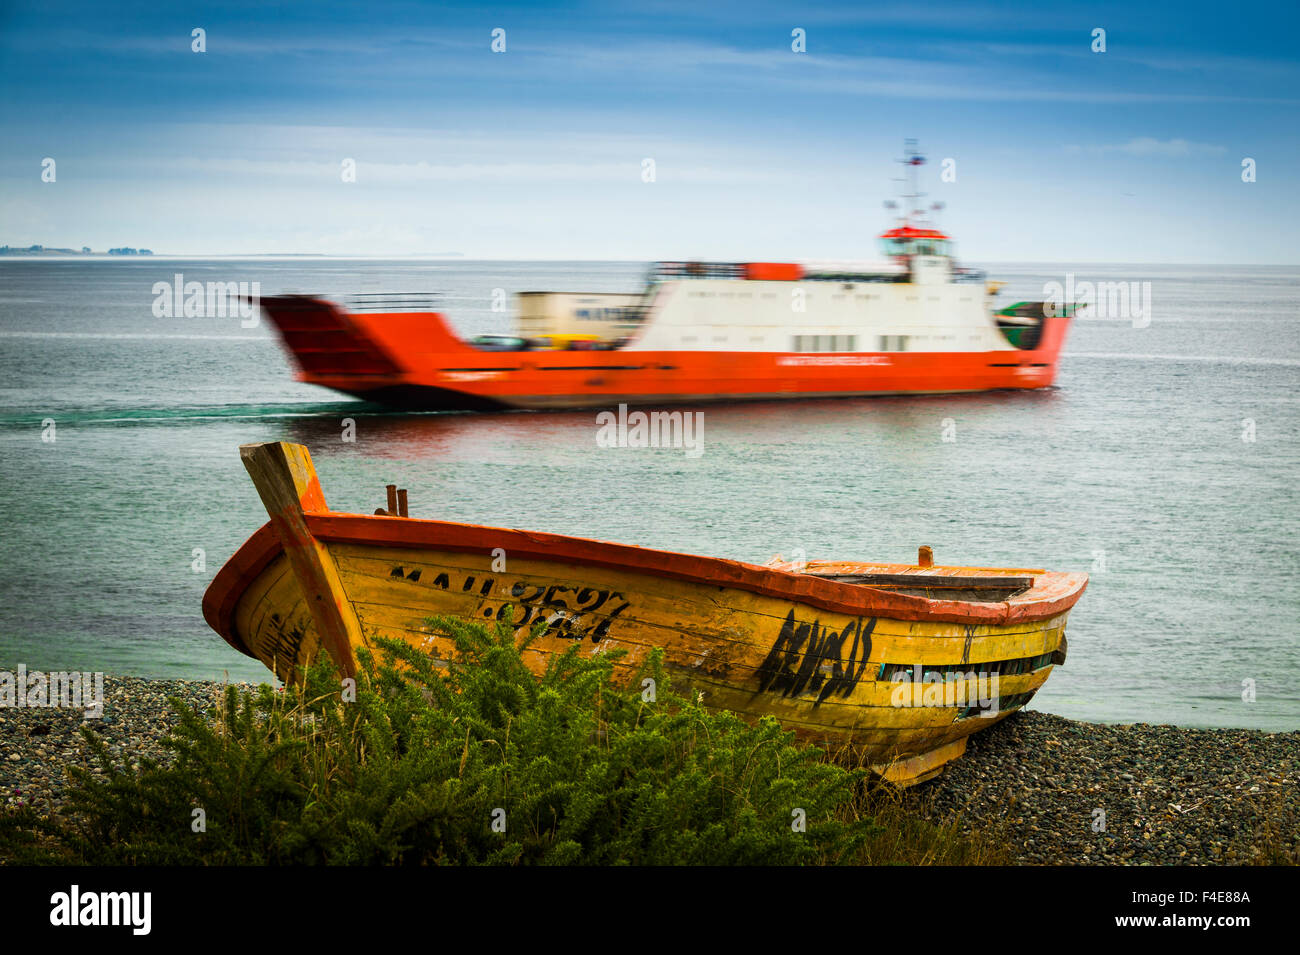 Ferry, canal chacao, chiloe, chile Stock Photo